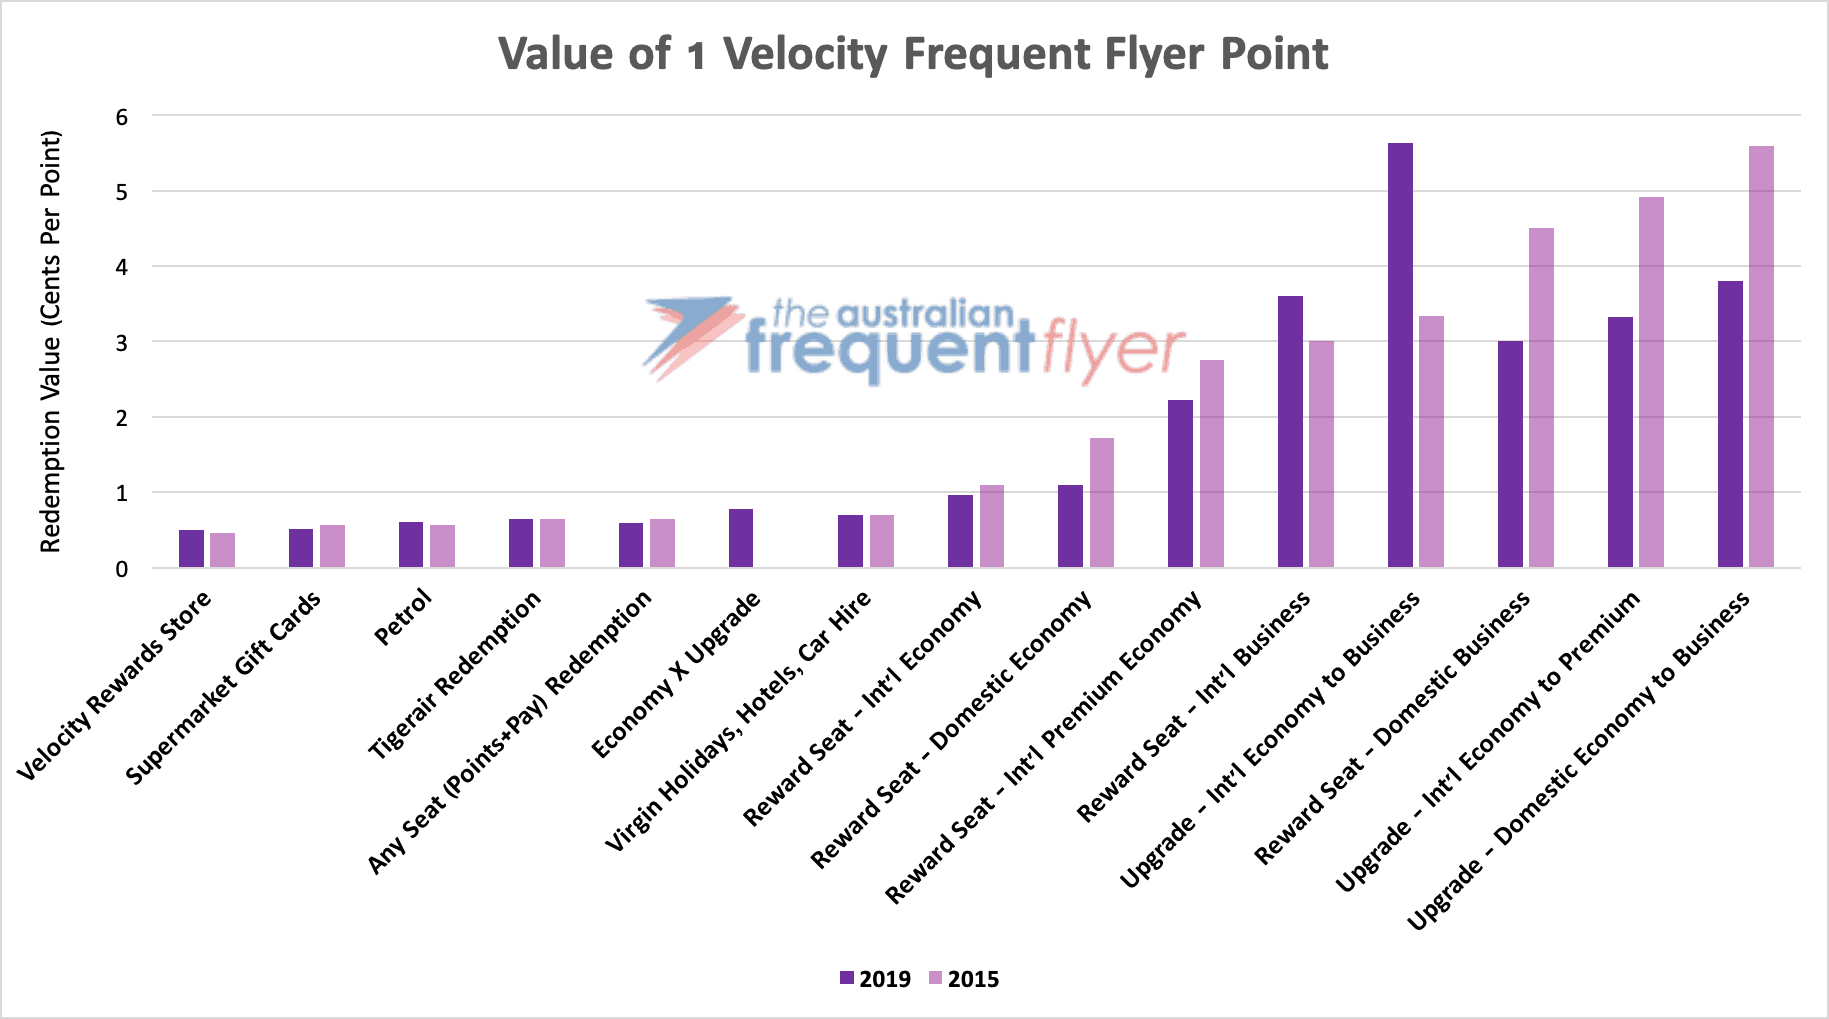 The value of a Velocity Frequent Flyer point